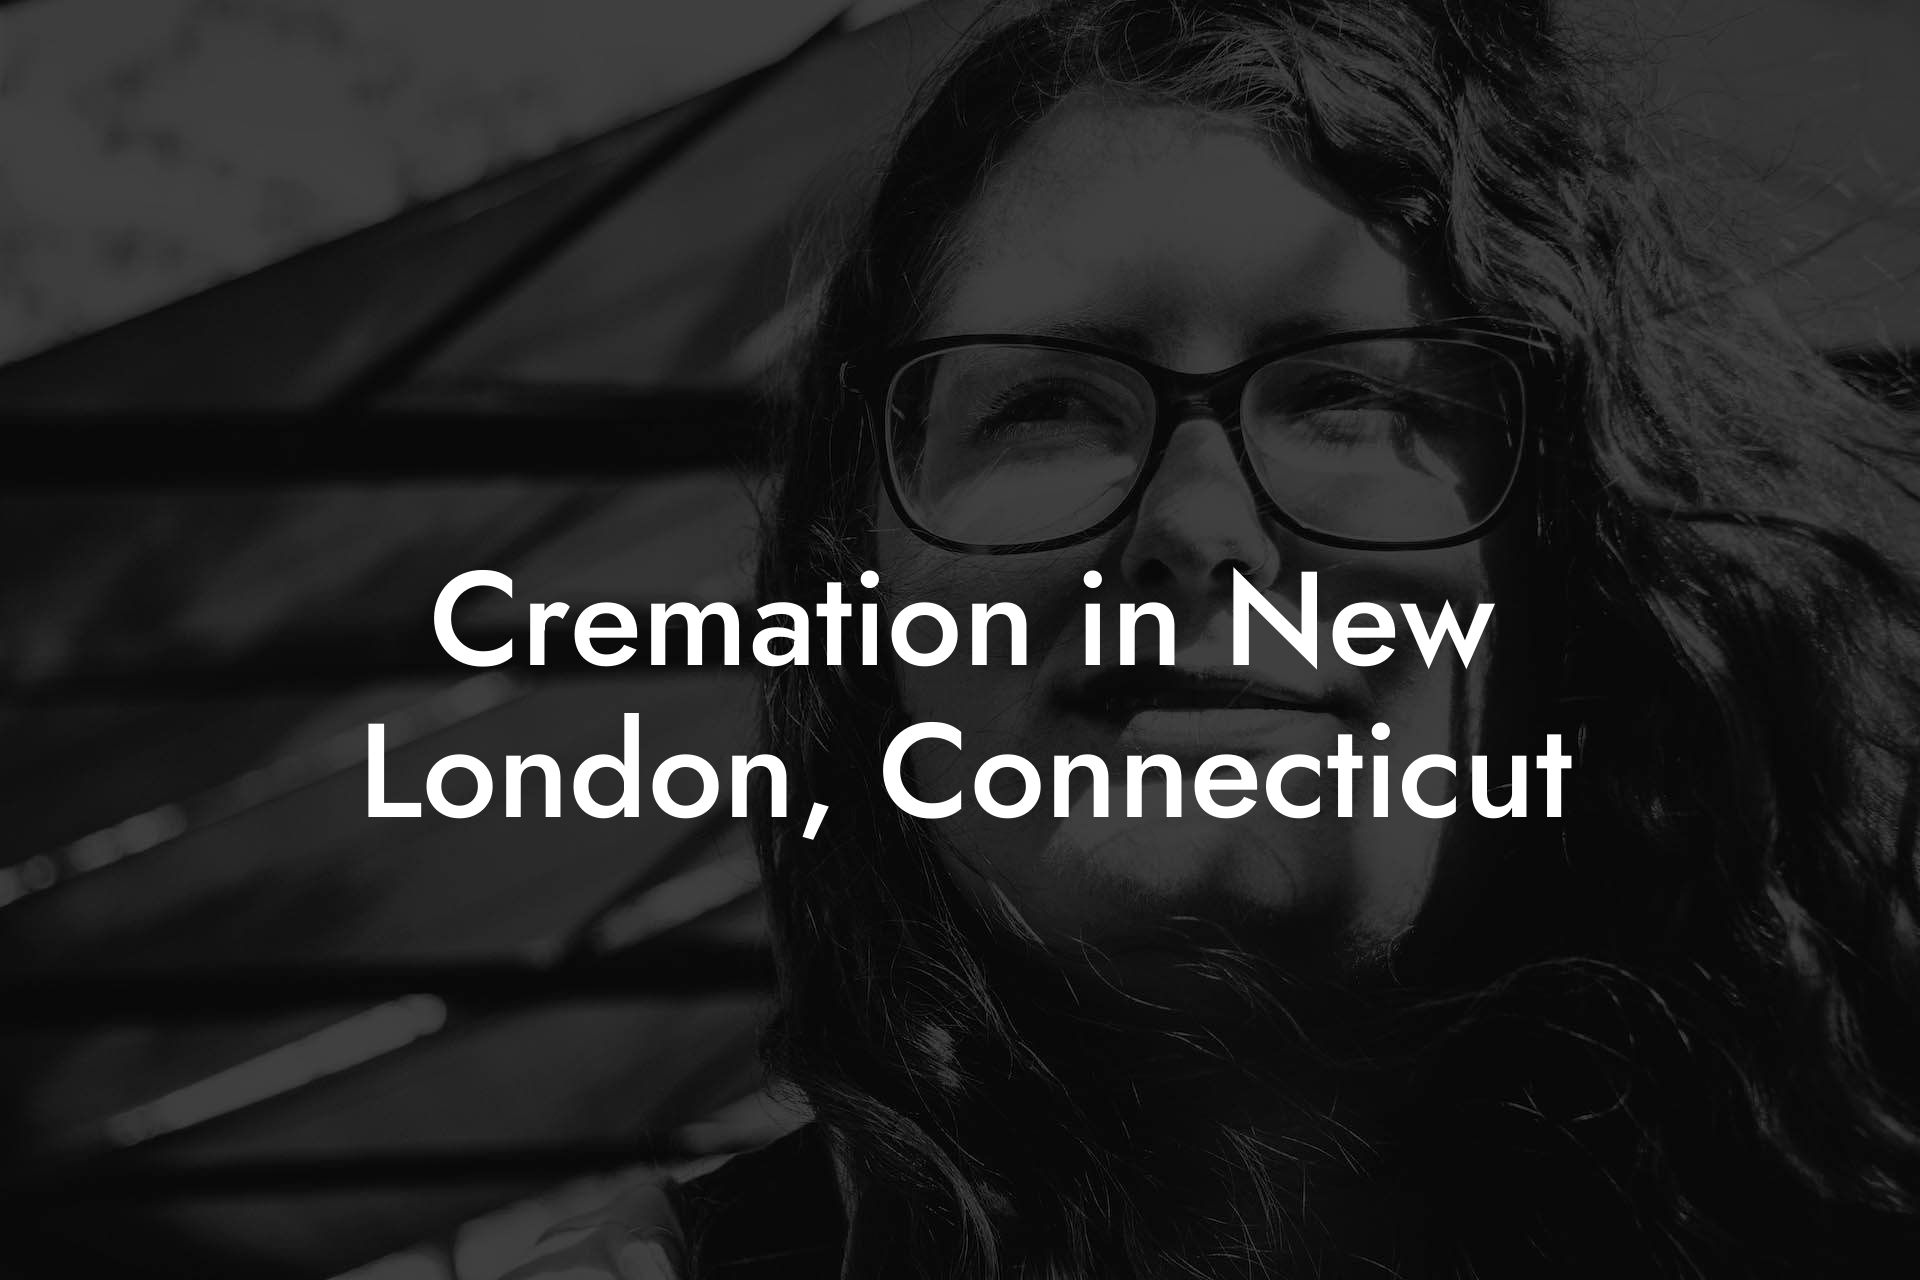 Cremation in New London, Connecticut